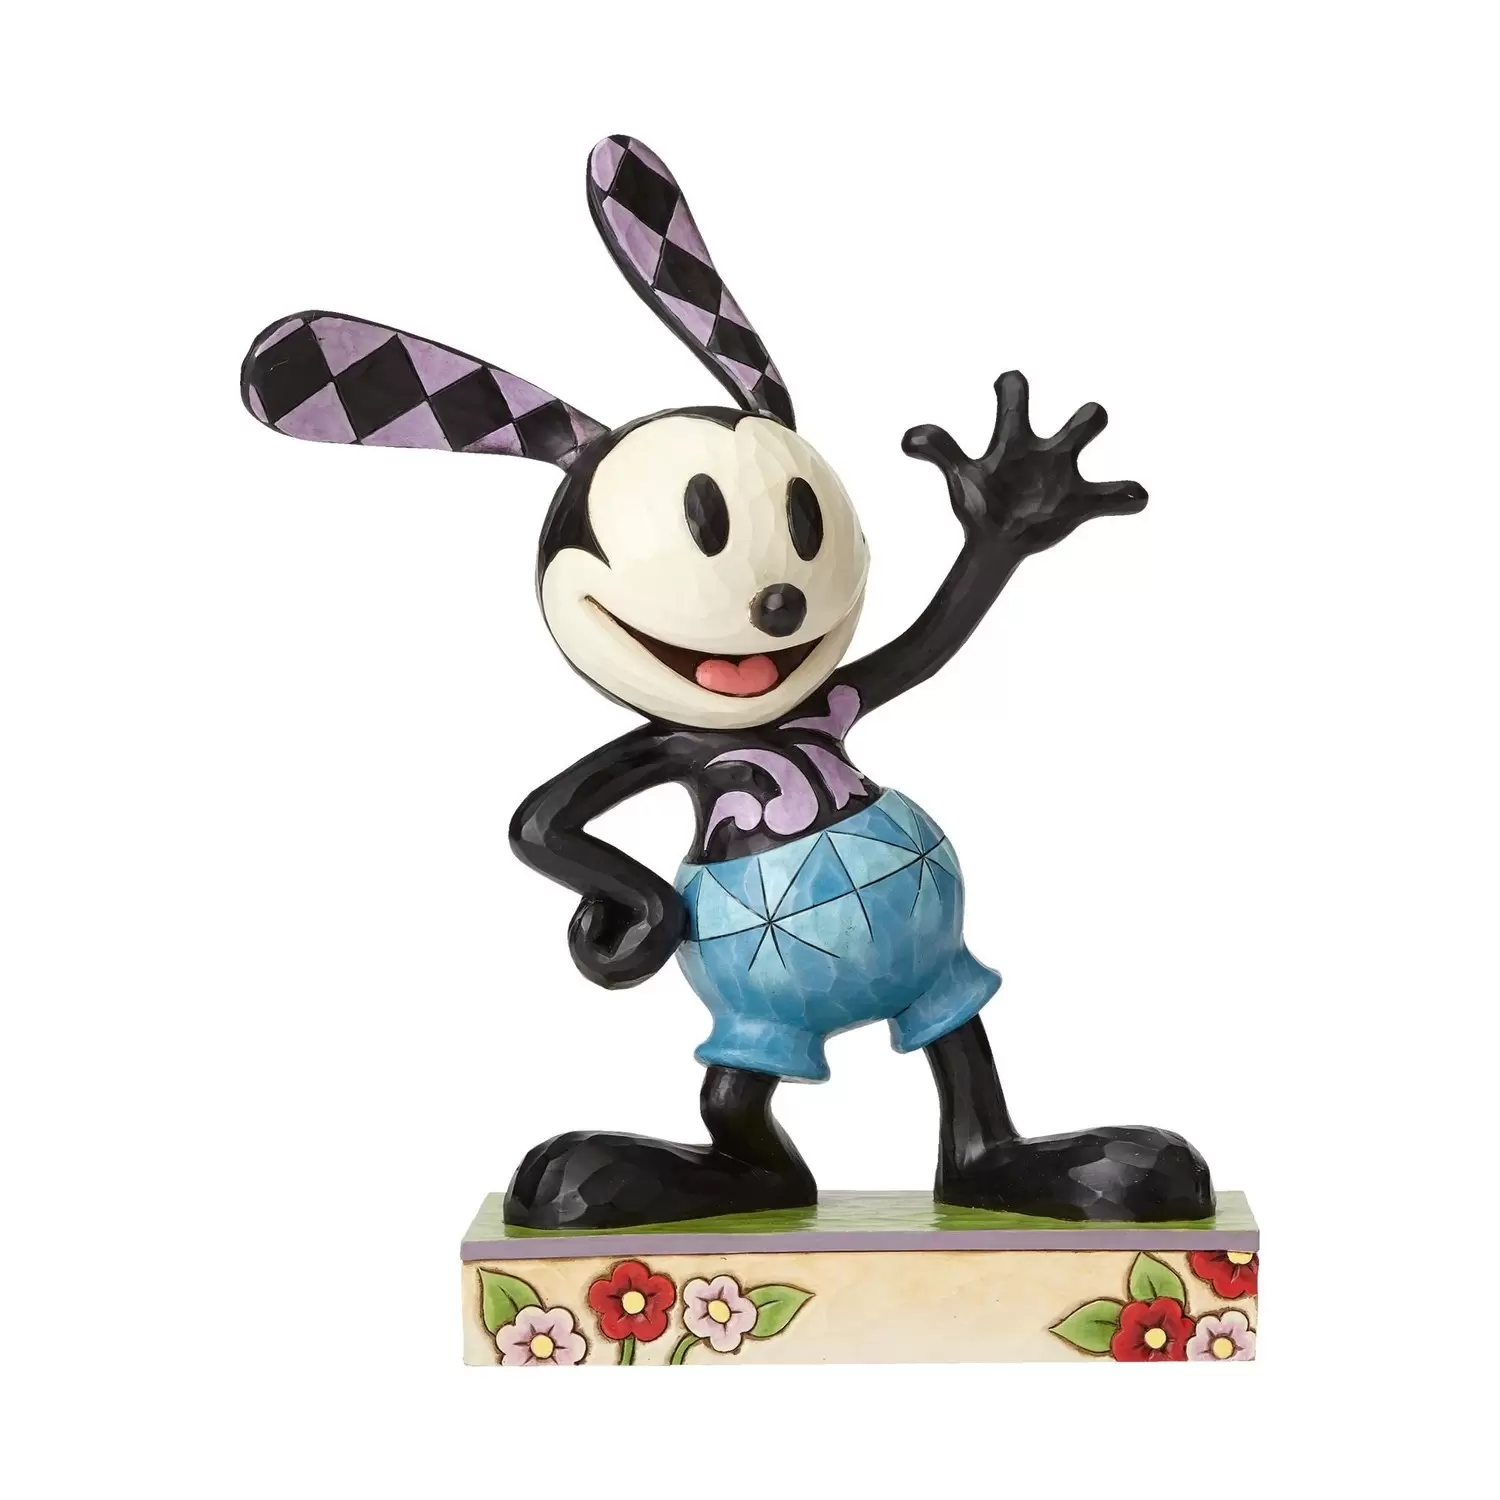 Disney Traditions by Jim Shore - The Lucky Rabbit - Oswald 90th Anniversary